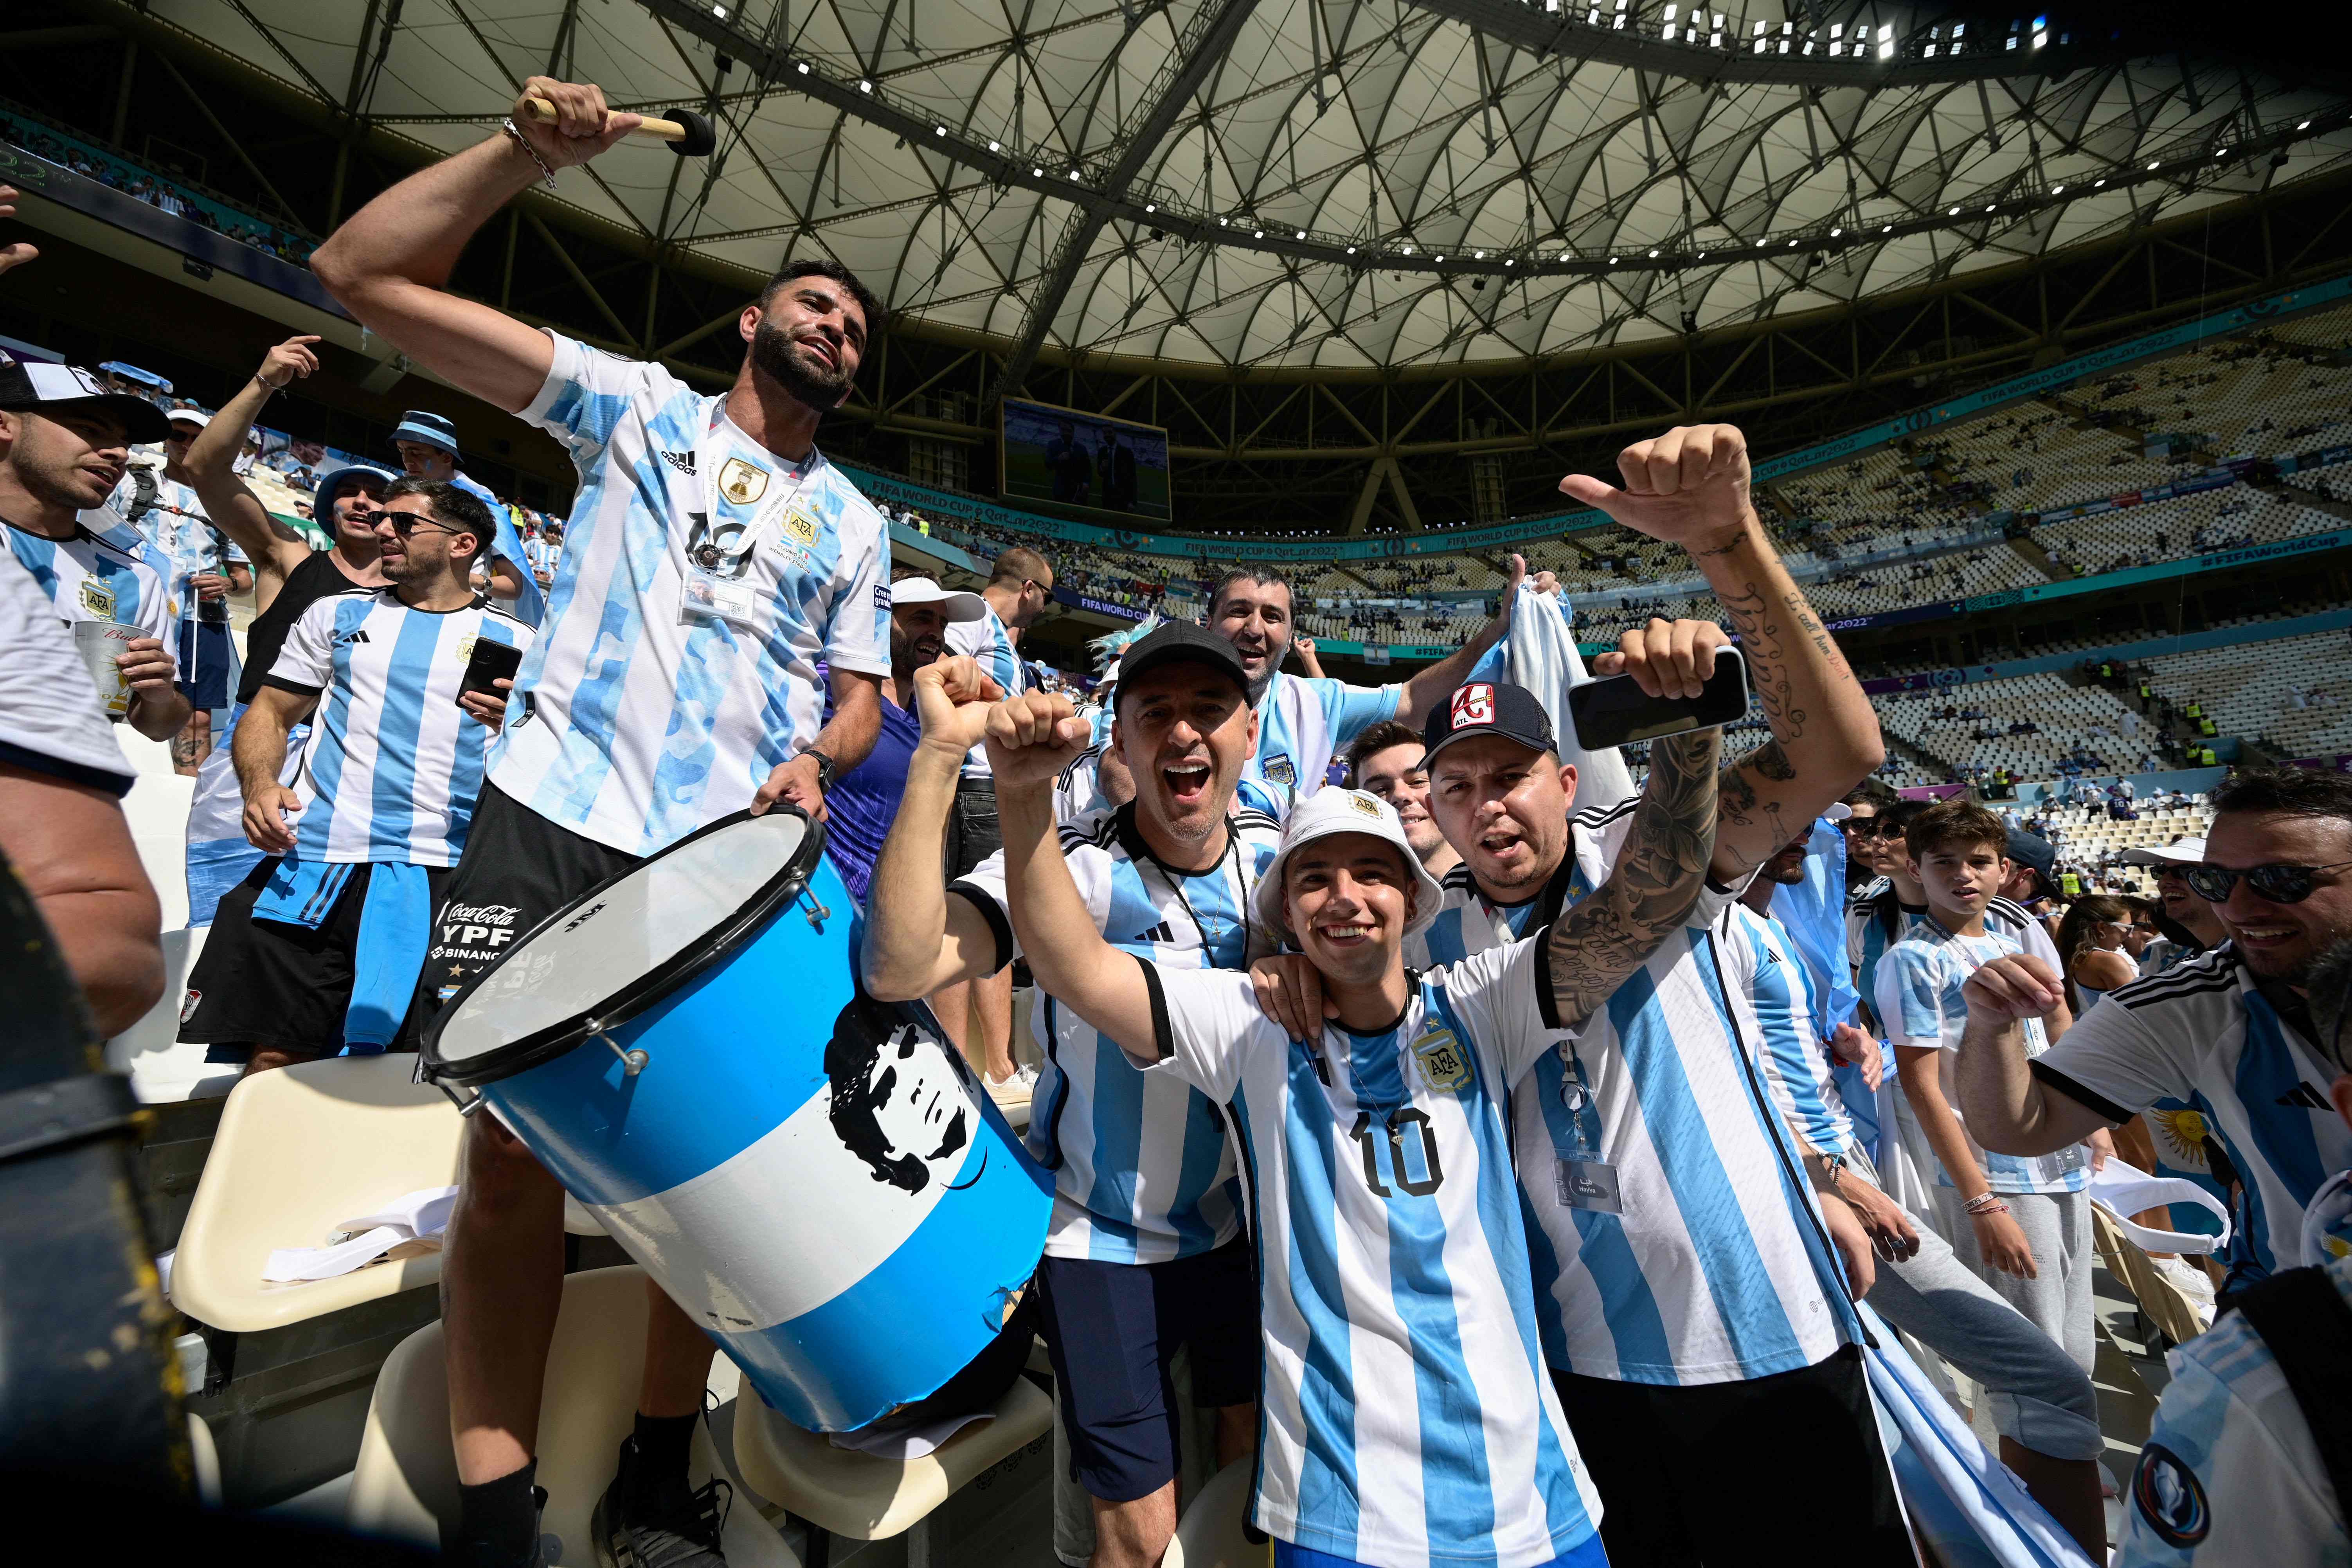 Love for Argentina' brings together 5,000 football fans in Qatar